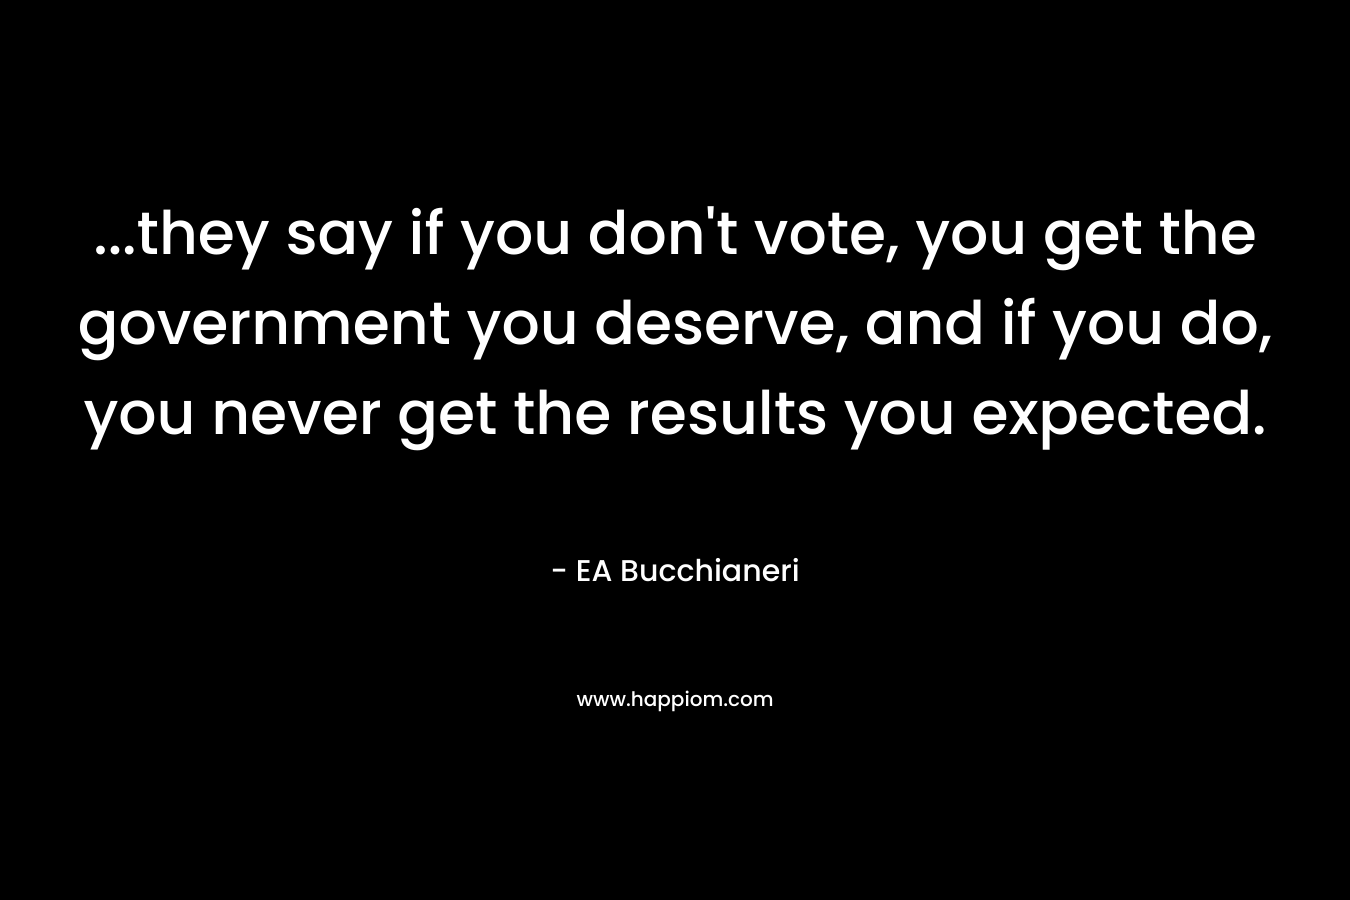 …they say if you don’t vote, you get the government you deserve, and if you do, you never get the results you expected. – EA Bucchianeri